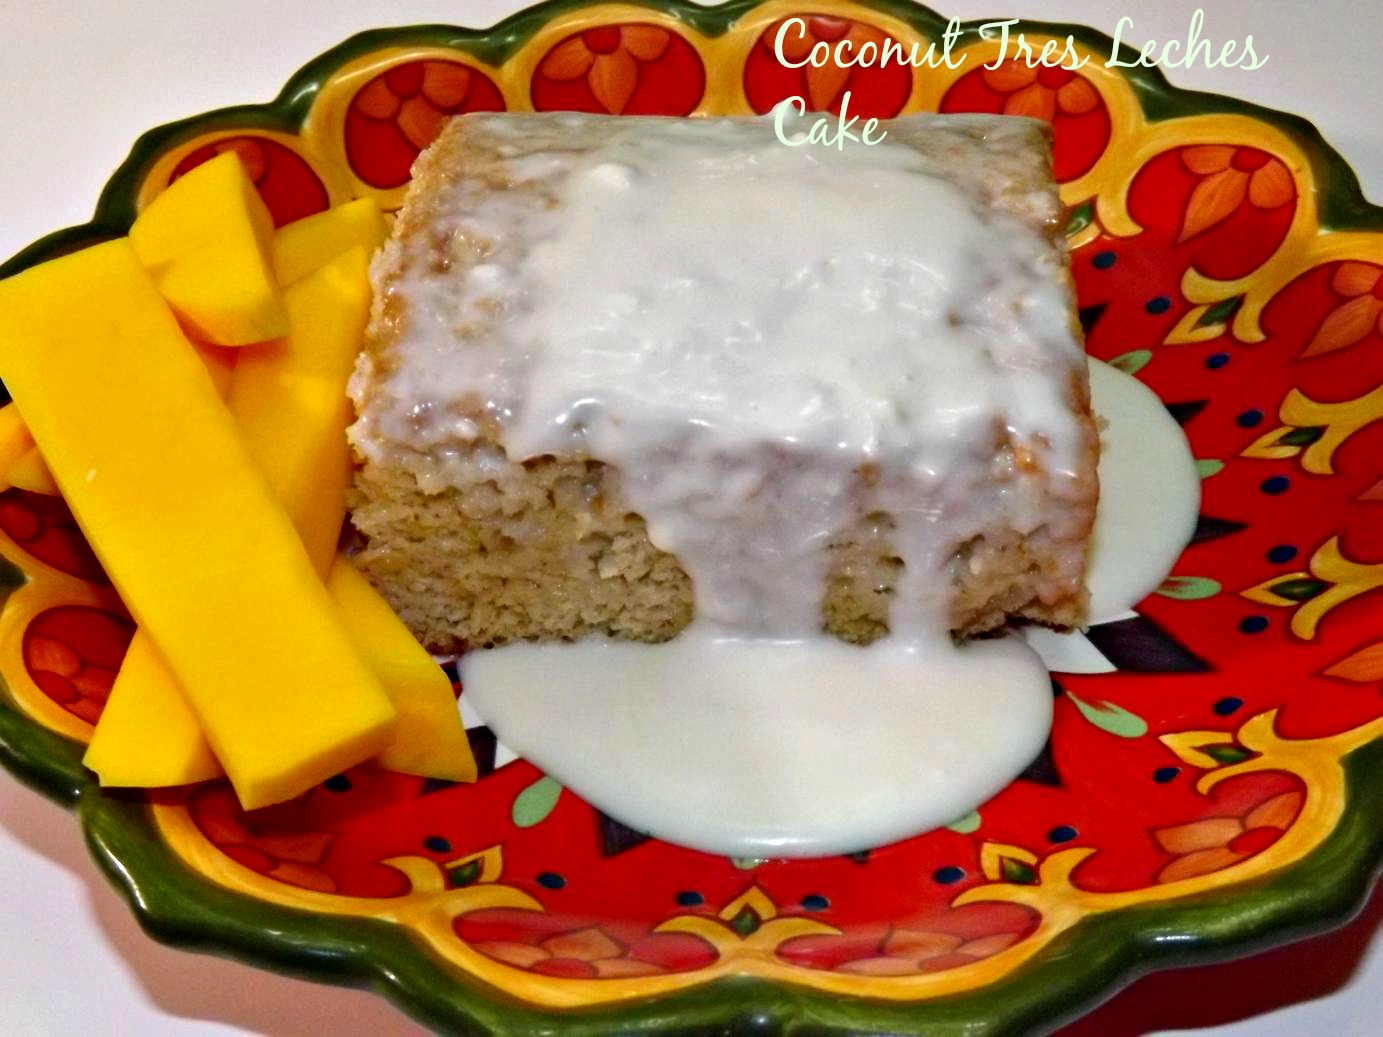 Coconut Tres Leches Cakes